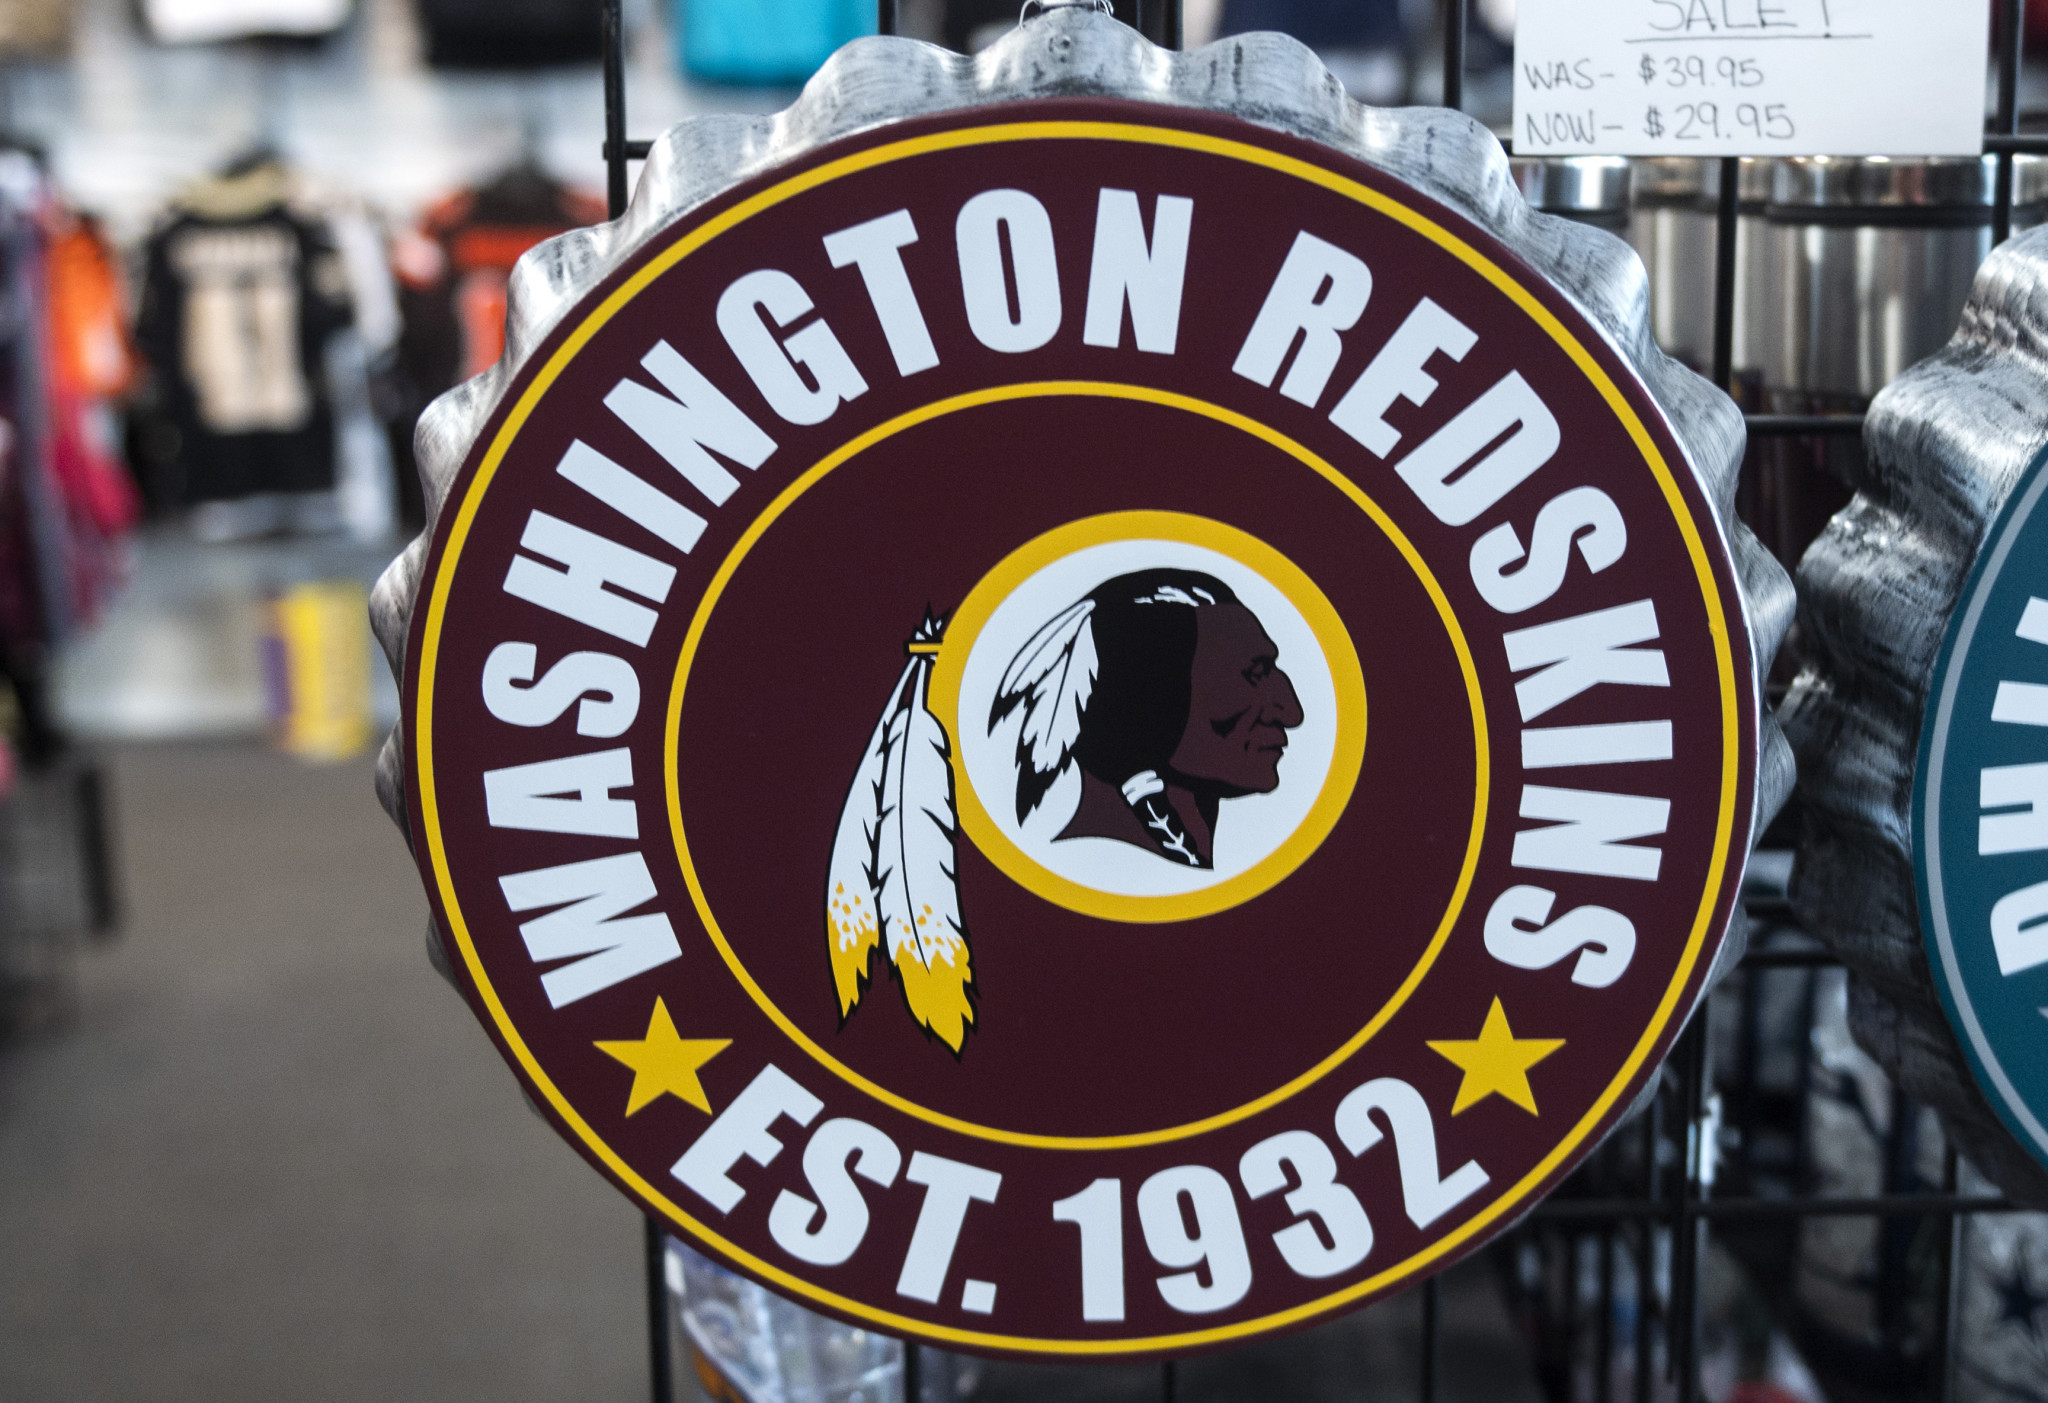 The Washington Redskins have opted to change their name ©Getty Images